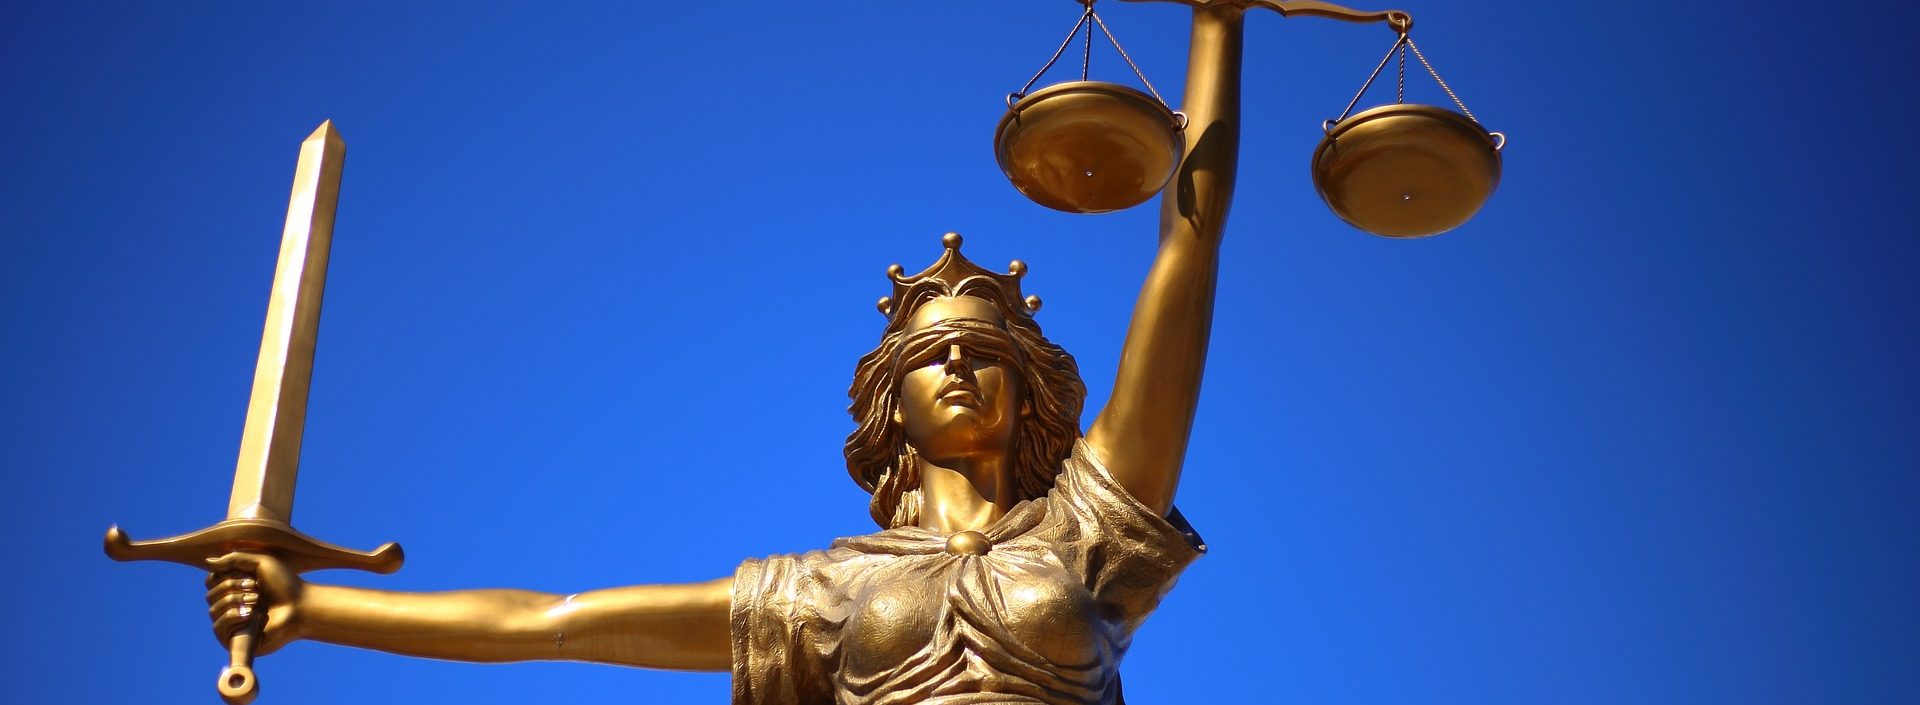 Cropped image a of a statue of justice personified as a woman. In one hand she is holding a sword, in the other she is holding scales. She is also blindfolded.